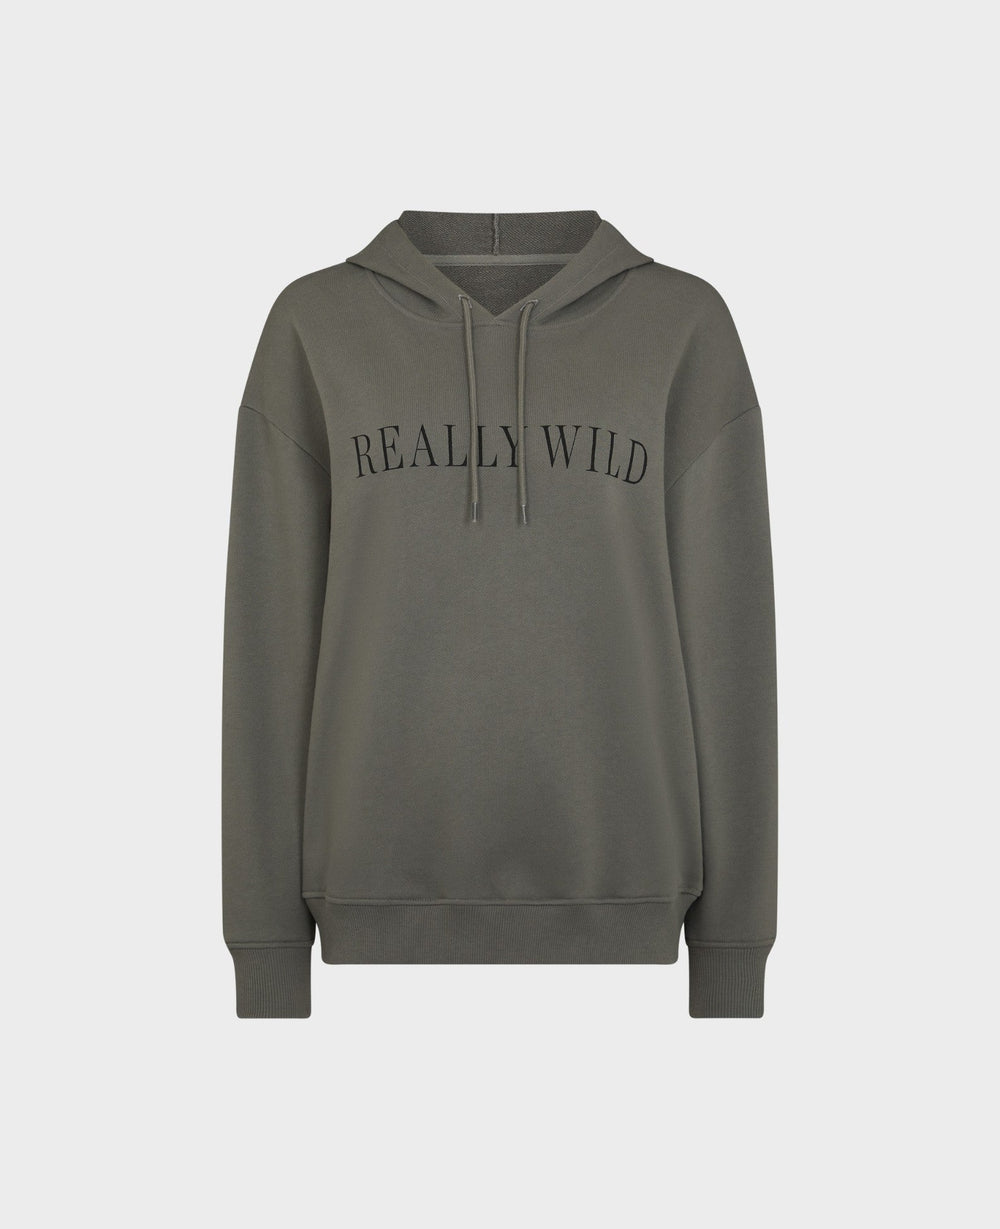 Cover up in our Really Wild logo print sweatshirt this season, made with 100% organic cotton in pared-back grey.